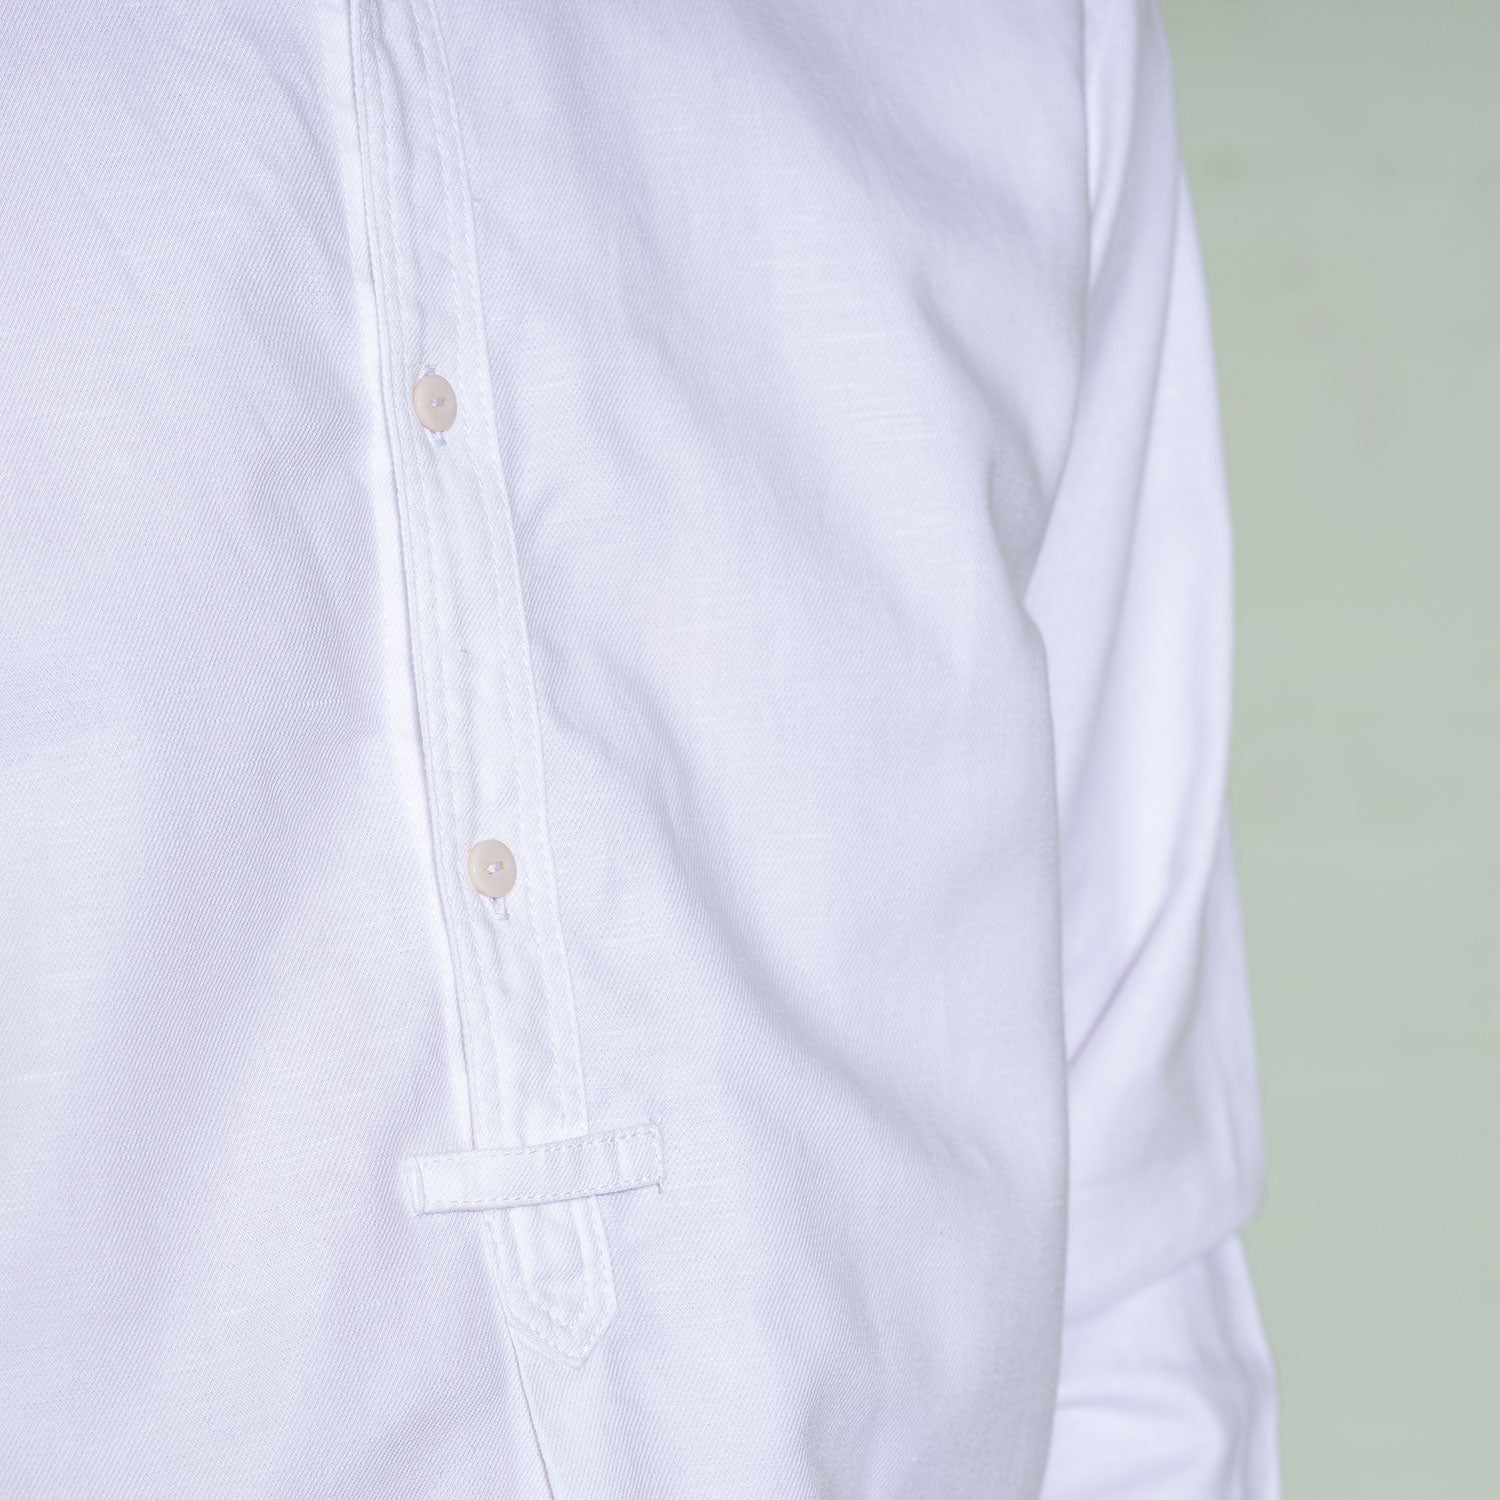 The Admiralty Shirt - White – yarmouthoilskins